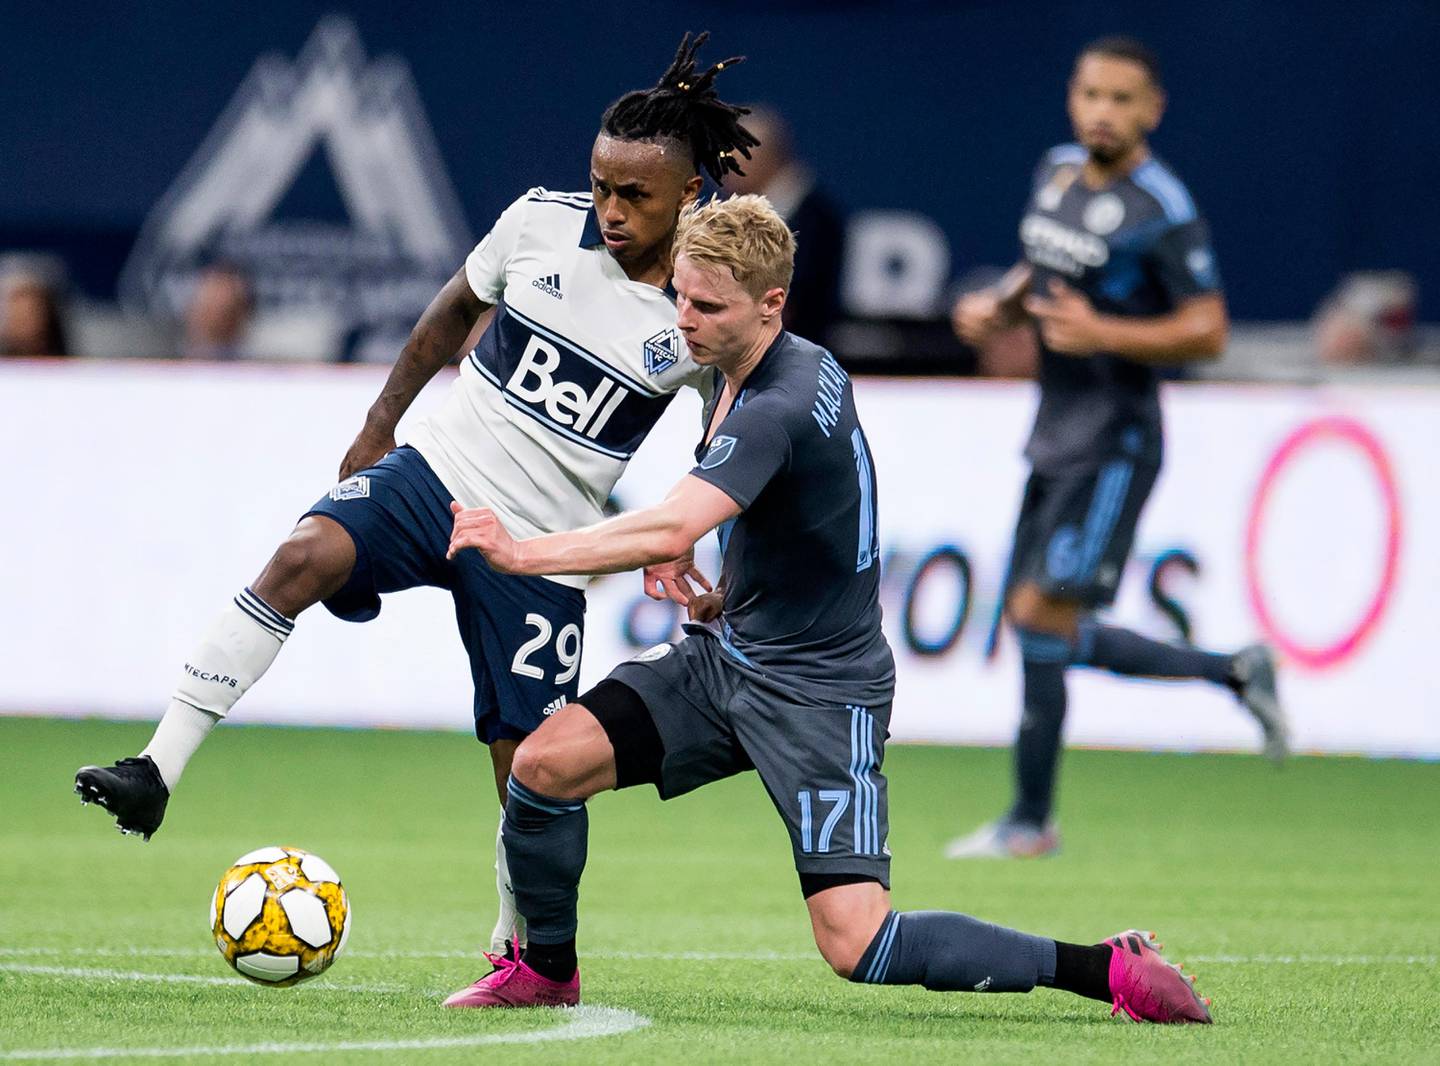 Vancouver Whitecaps forward Yordi Reyna (29) fights for control of the ball with New York City FC Gary Mackay-Steven during the second half of MLS soccer match in Vancouver, British Columbia, Saturday, Aug. 31, 2019. (Jonathan Hayward/The Canadian Press via AP)